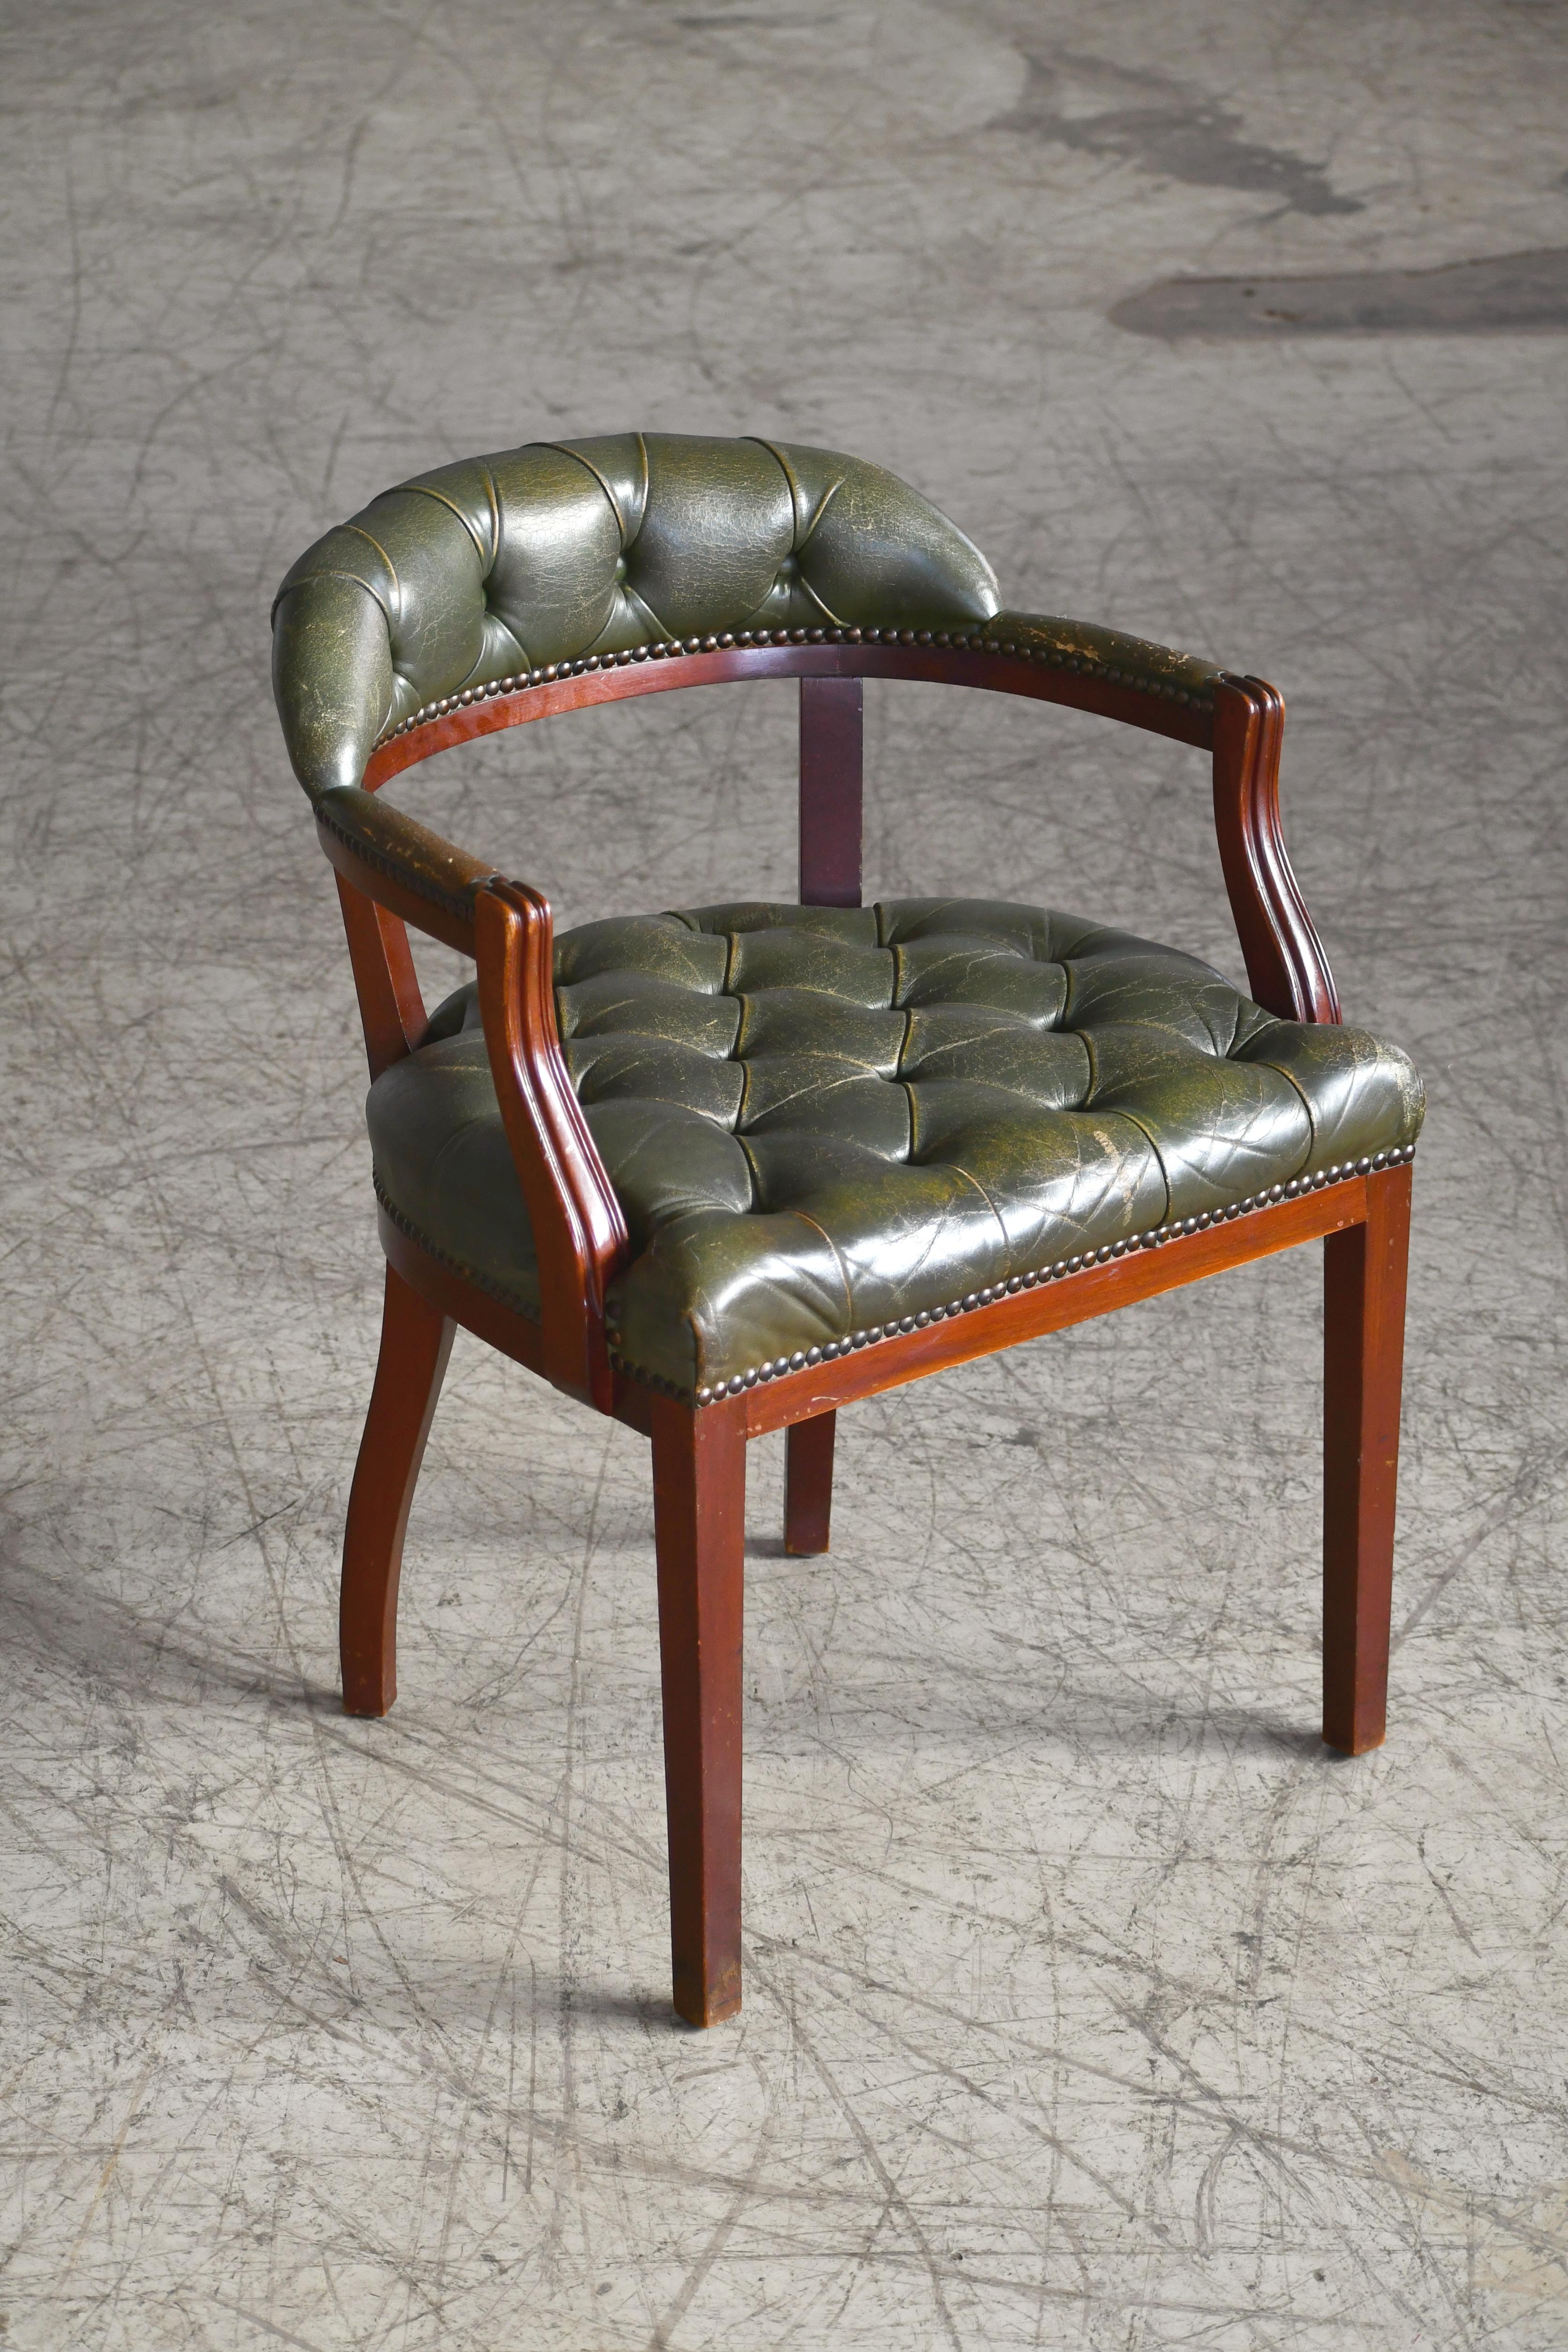 Stylish and very nice Chesterfield-style court chair in green leather and mahogany from the 1950s. The frame is solid mahogany with all the brass studs individually hand nailed in place. Great color with the leather showing some noble wear and